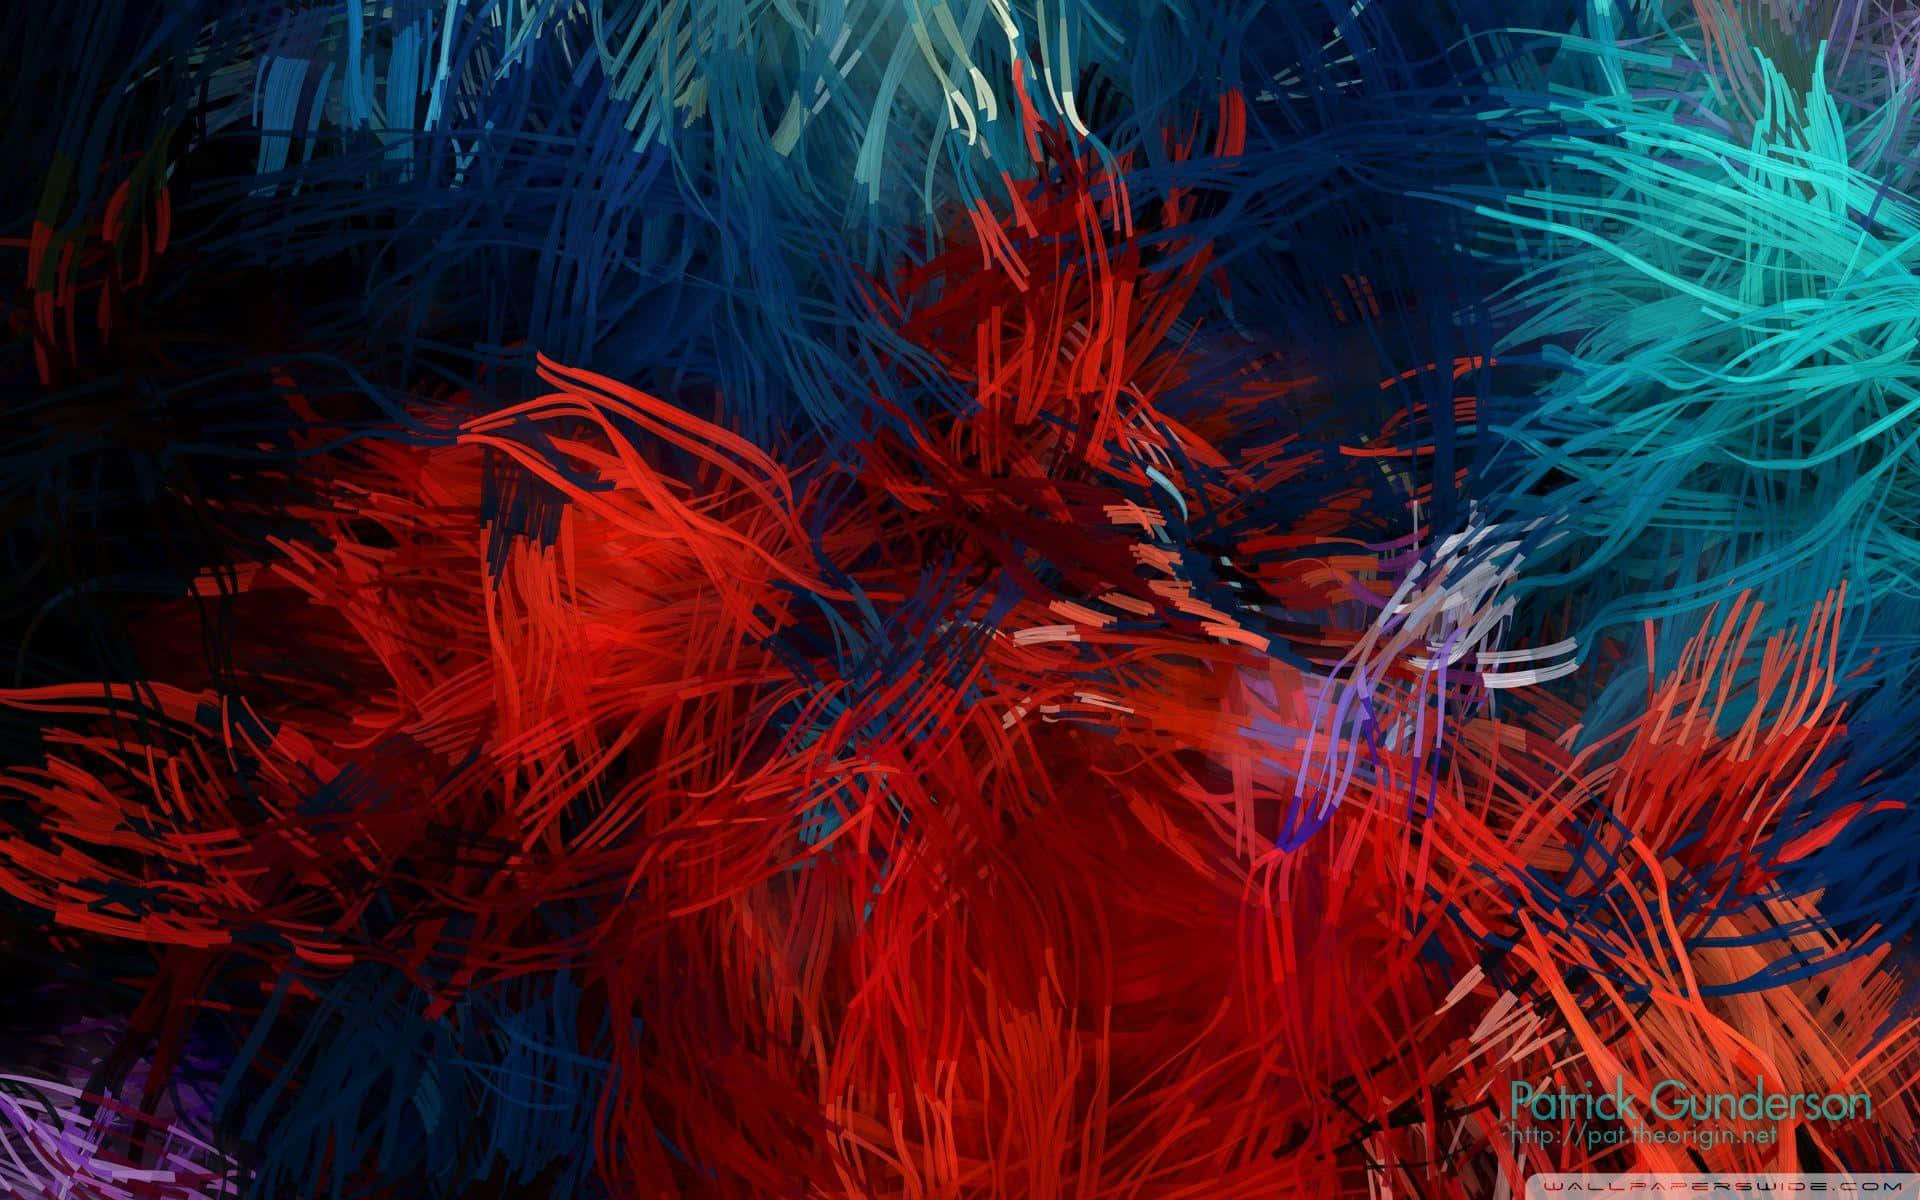 A Colorful Abstract Painting With Red, Blue, And Green Wallpaper